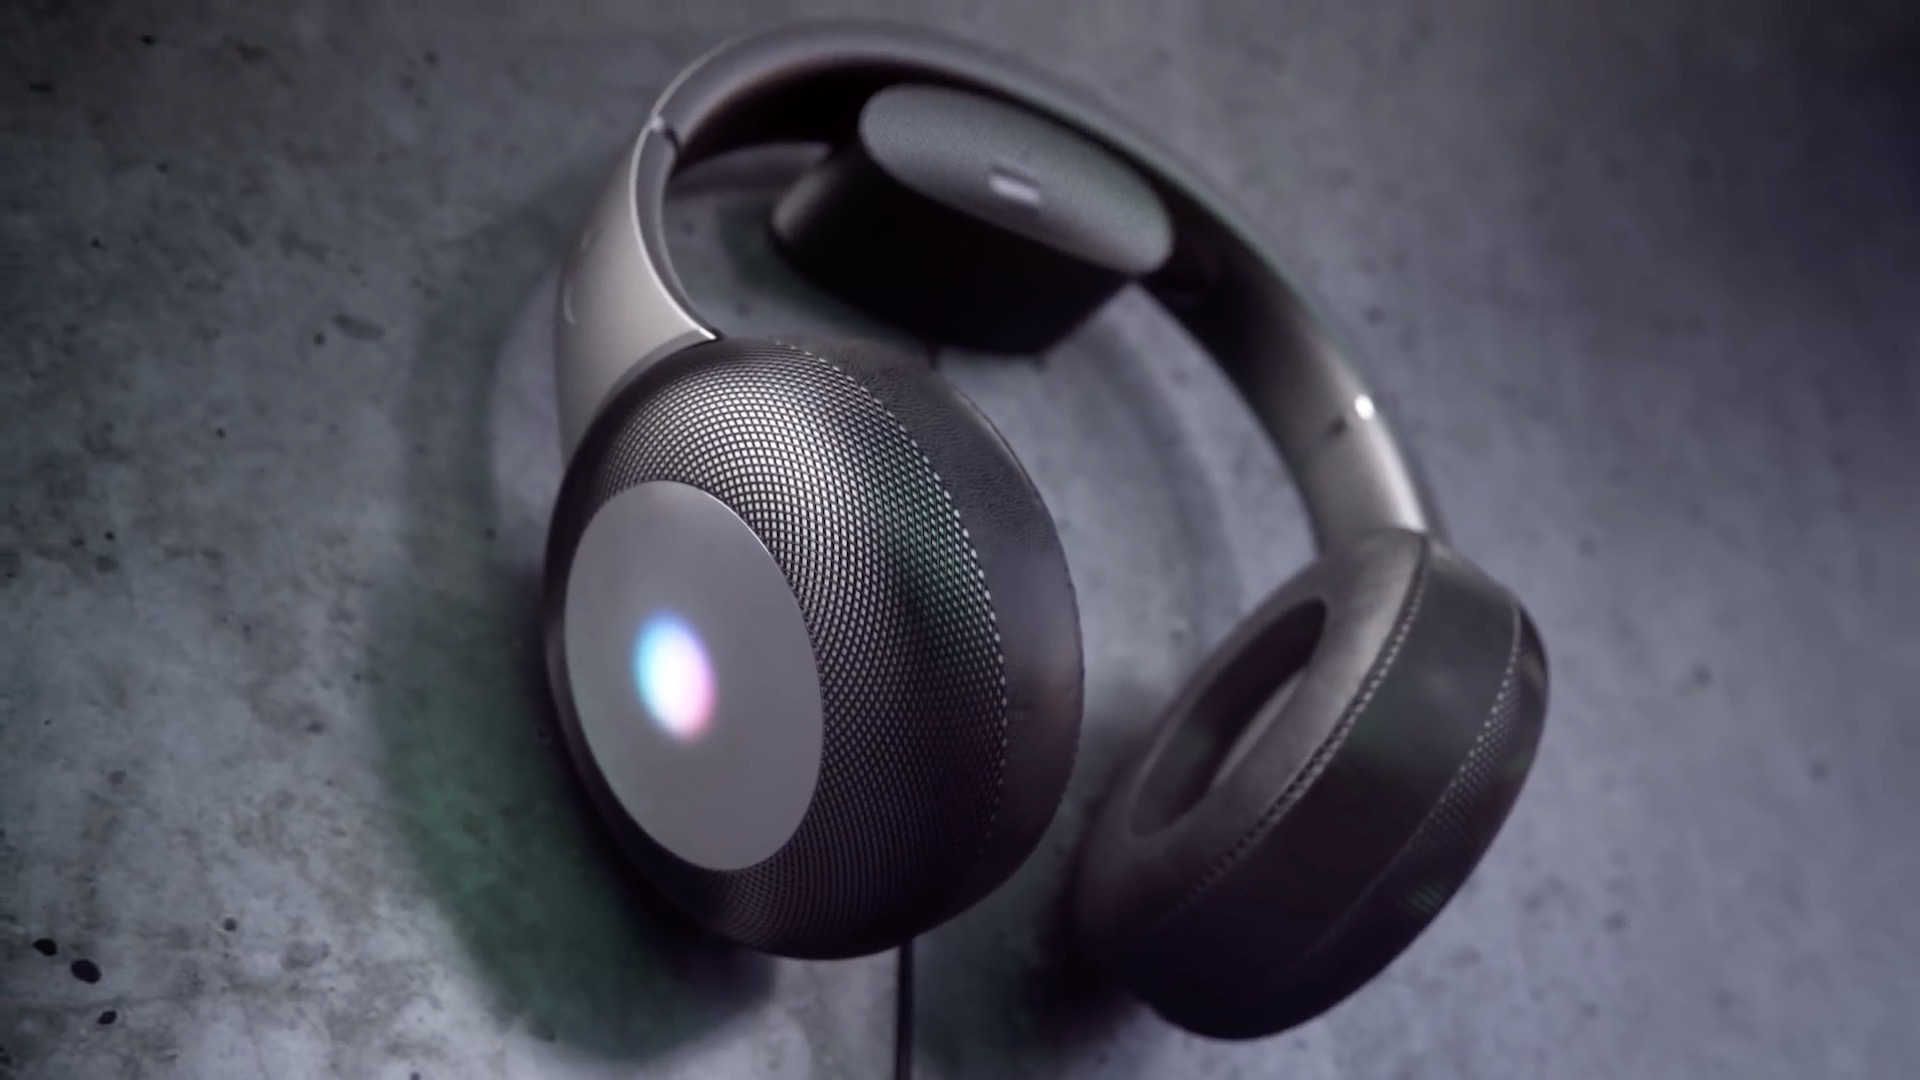 Apple Over Ear Headphones Concept Images 6